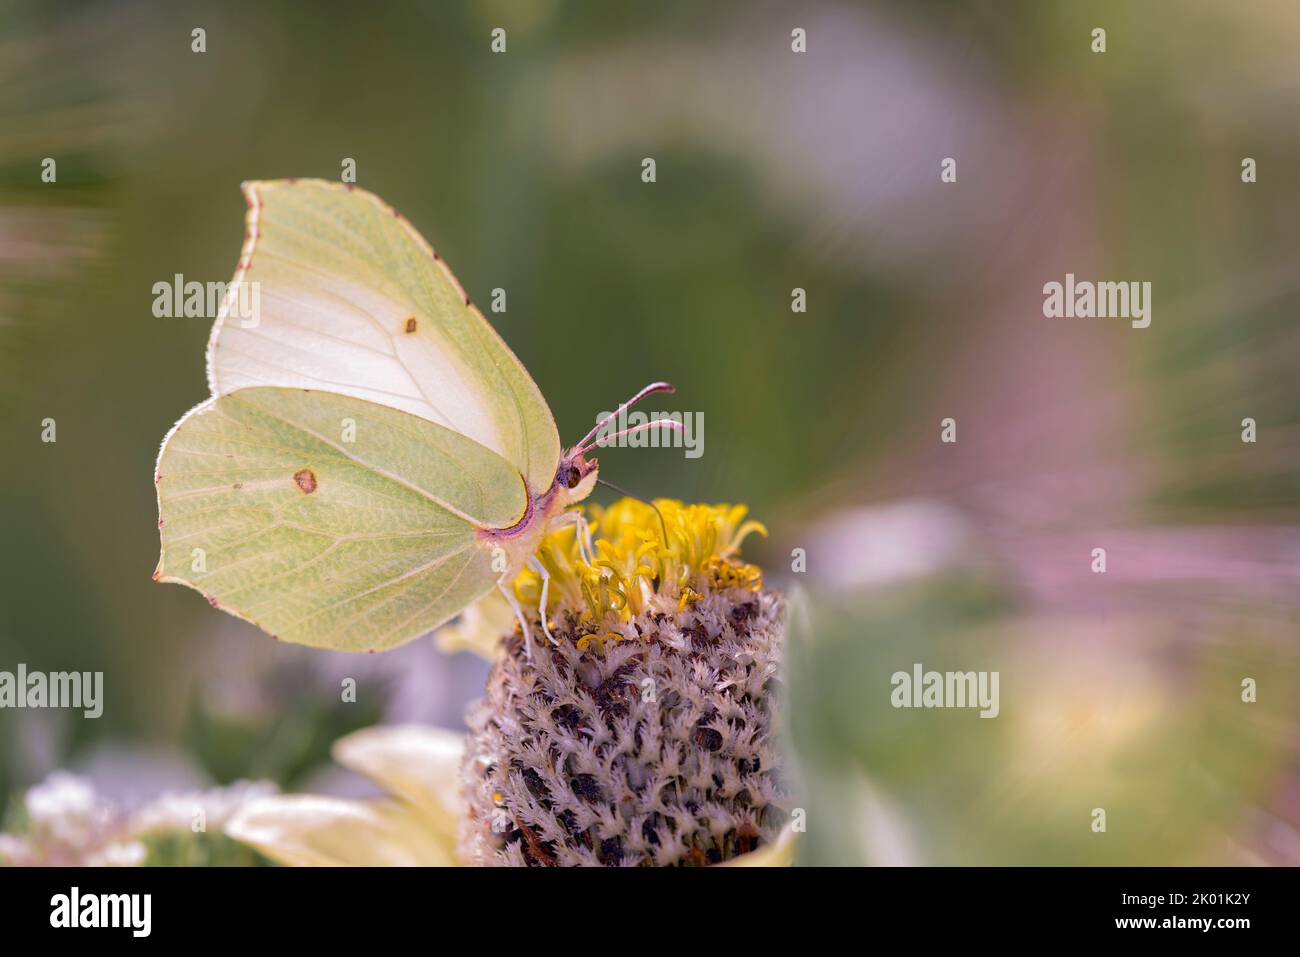 Common brimstone butterfly - Gonepteryx rhamni sucks nectar with its trunk from the blossom of the common zinnia or elegant zinnia - Zinnia elegans Stock Photo